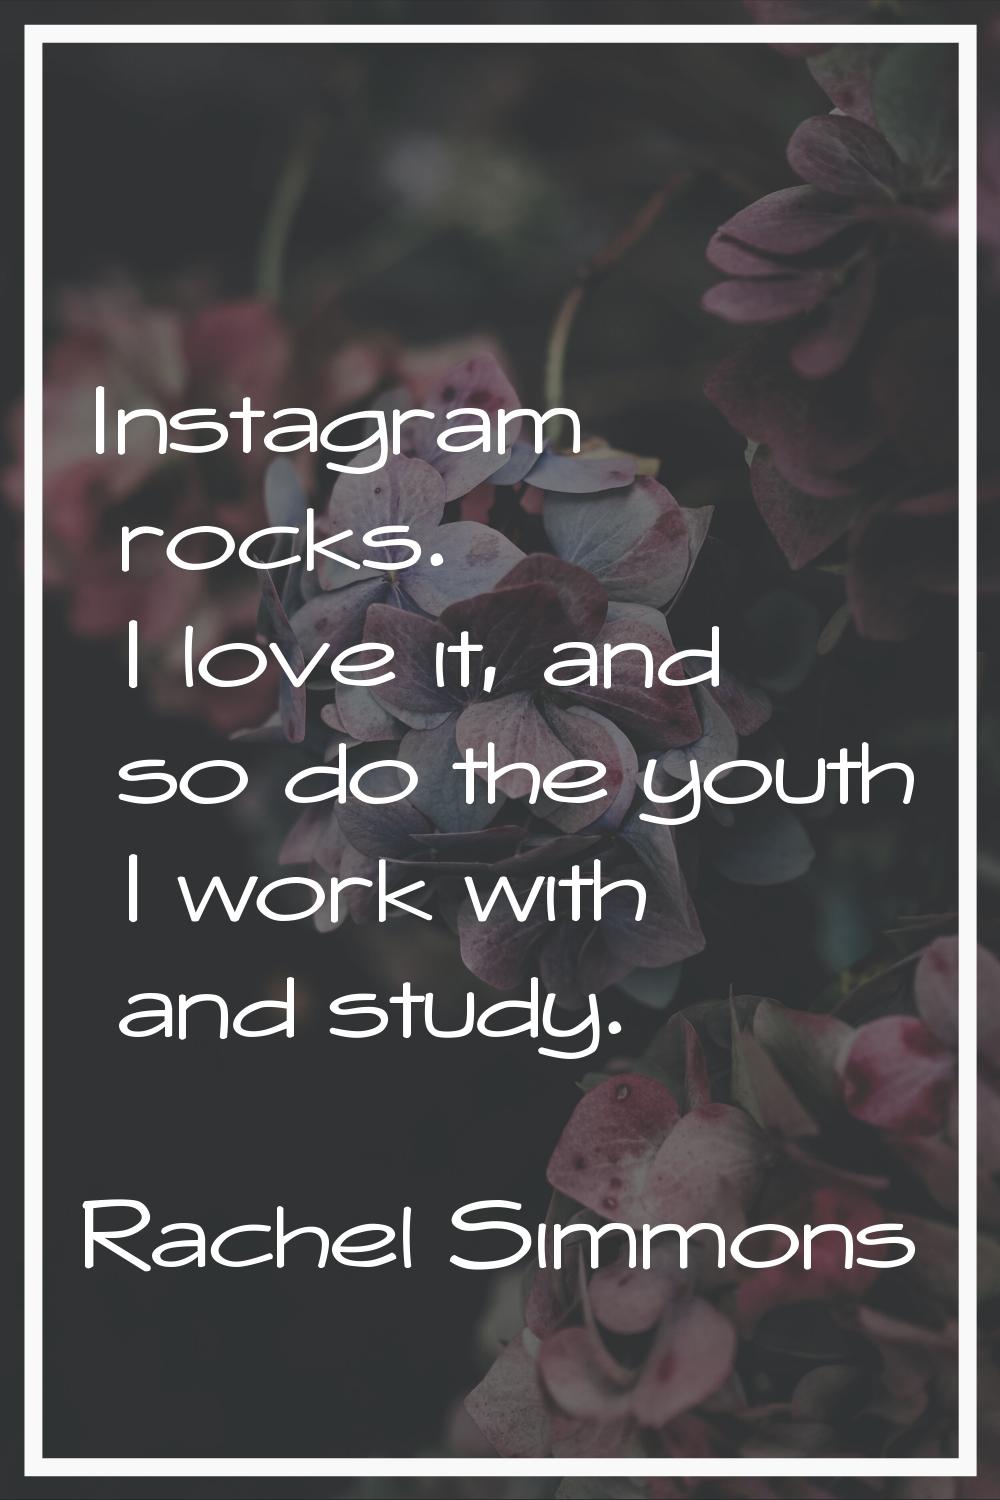 Instagram rocks. I love it, and so do the youth I work with and study.